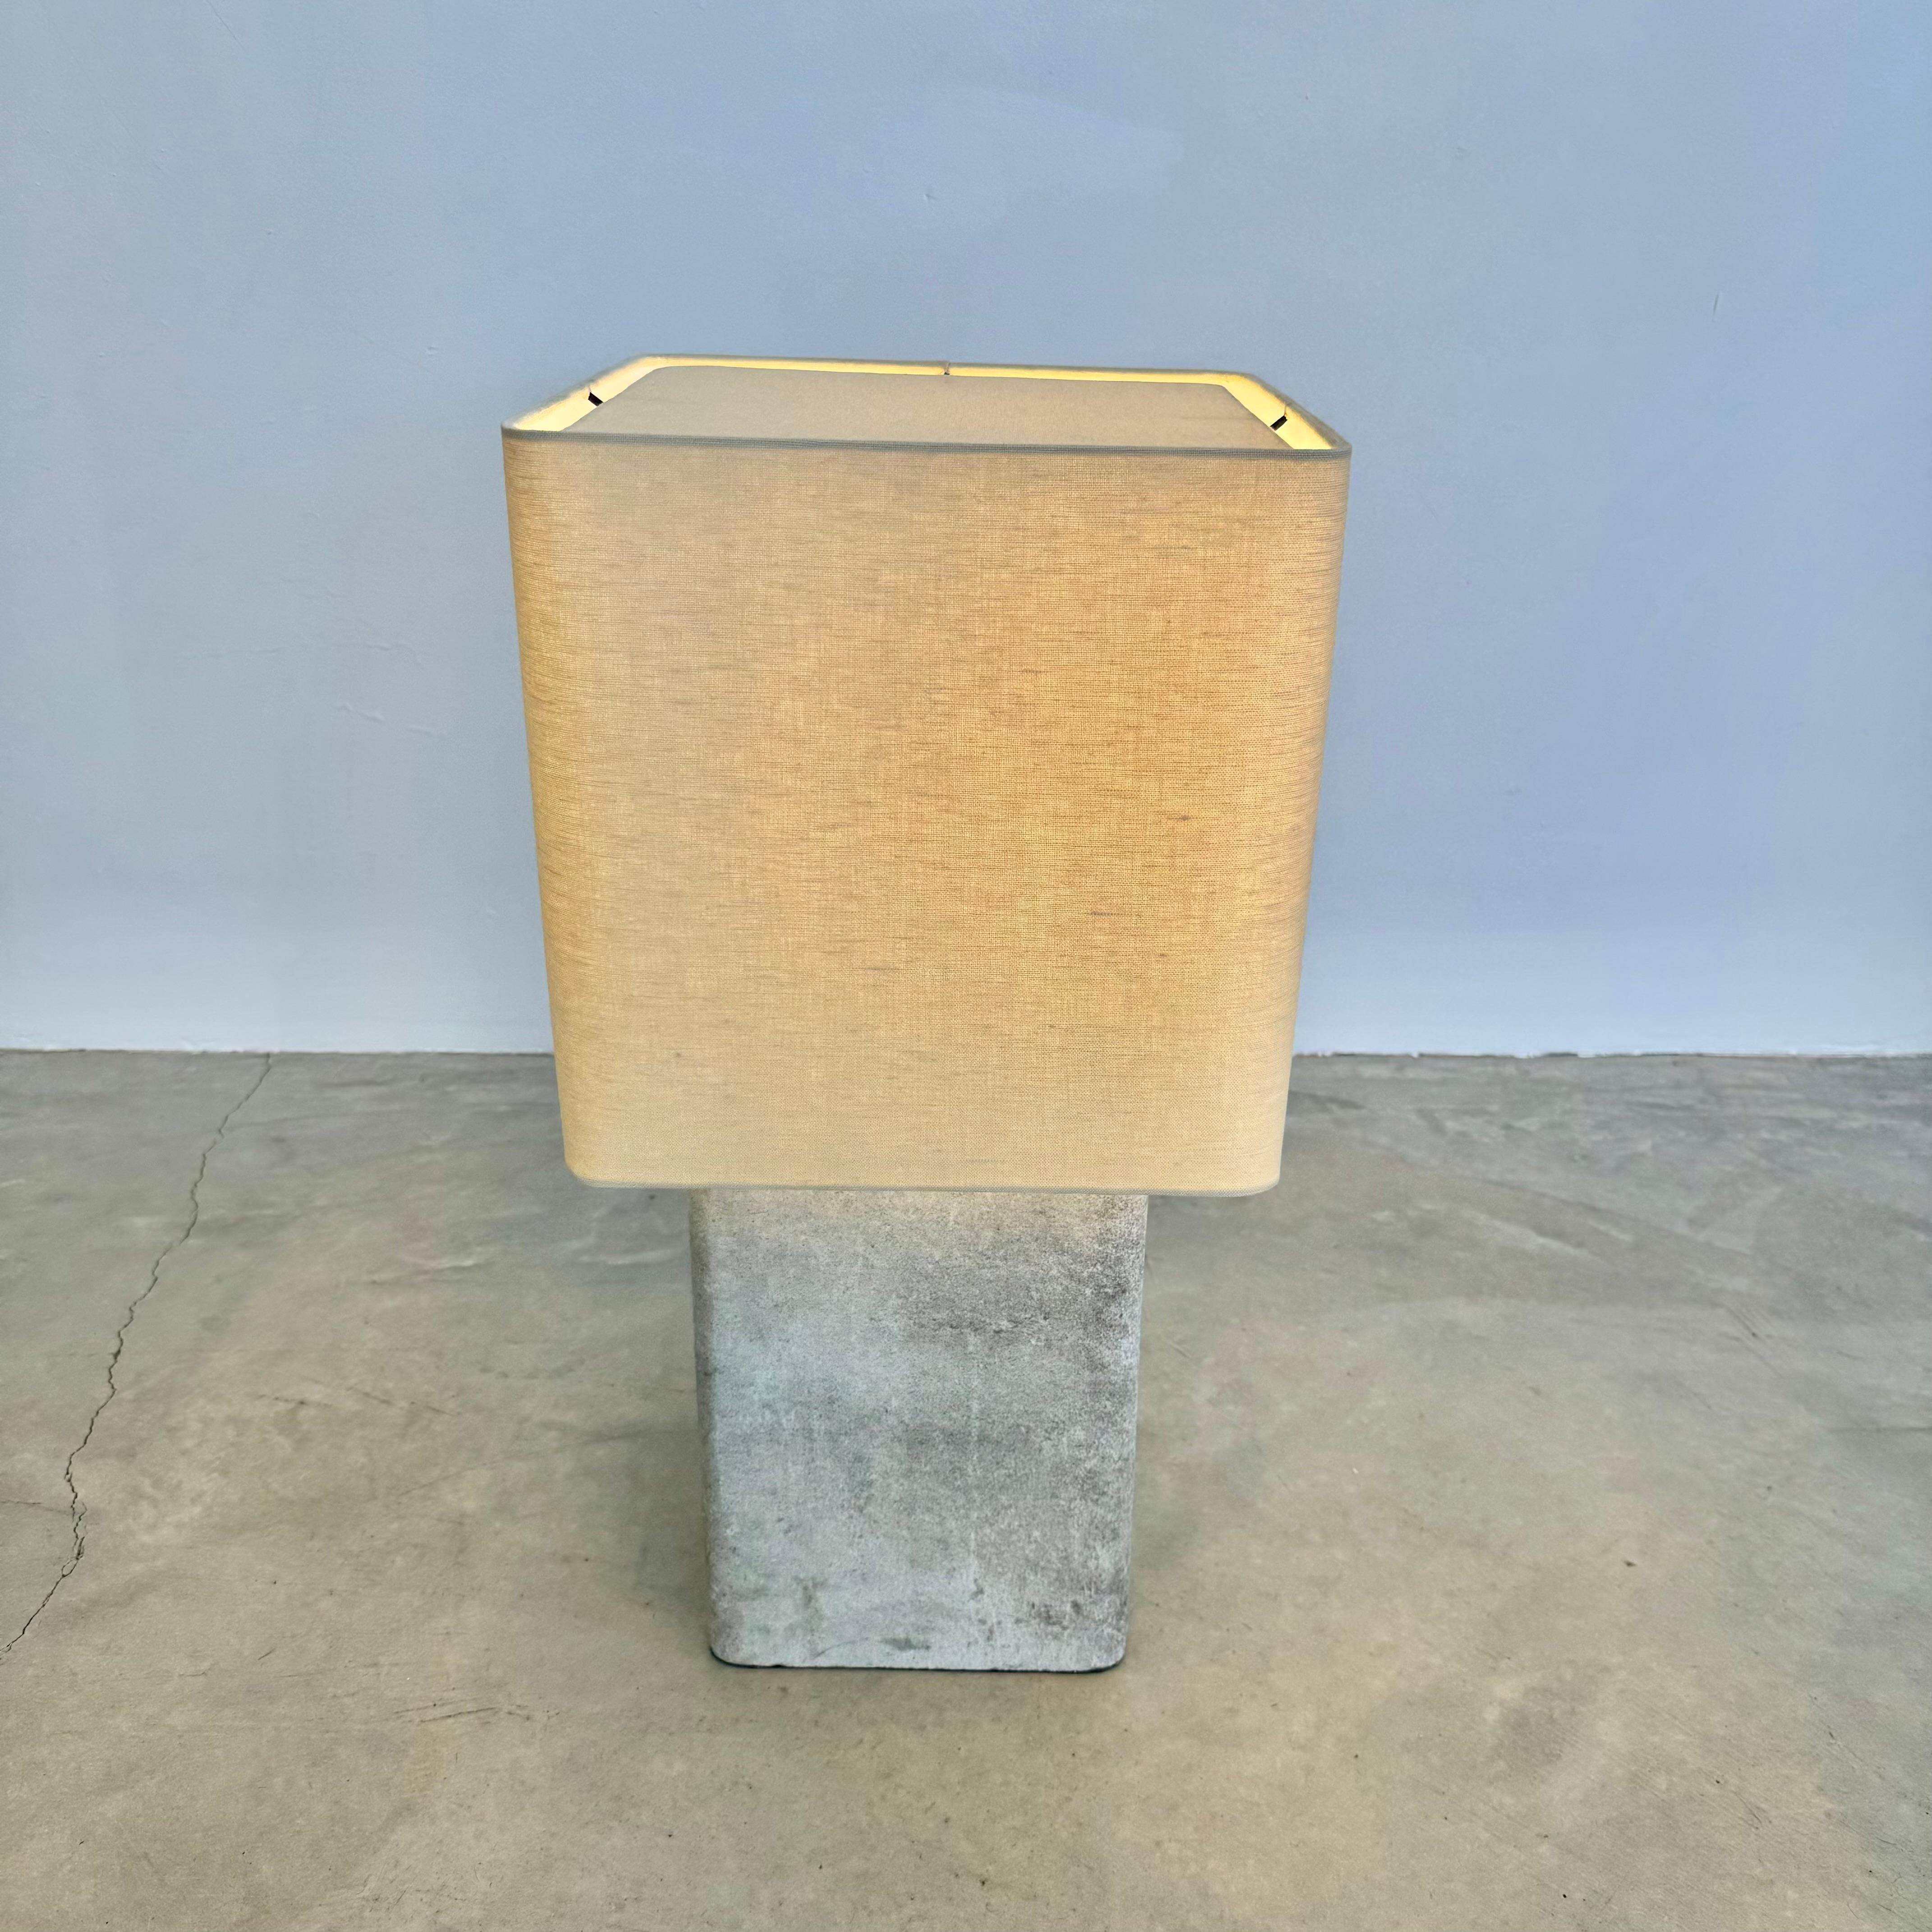 Swiss Willy Guhl Large Concrete Table Lamp, 1960s Switzerland For Sale